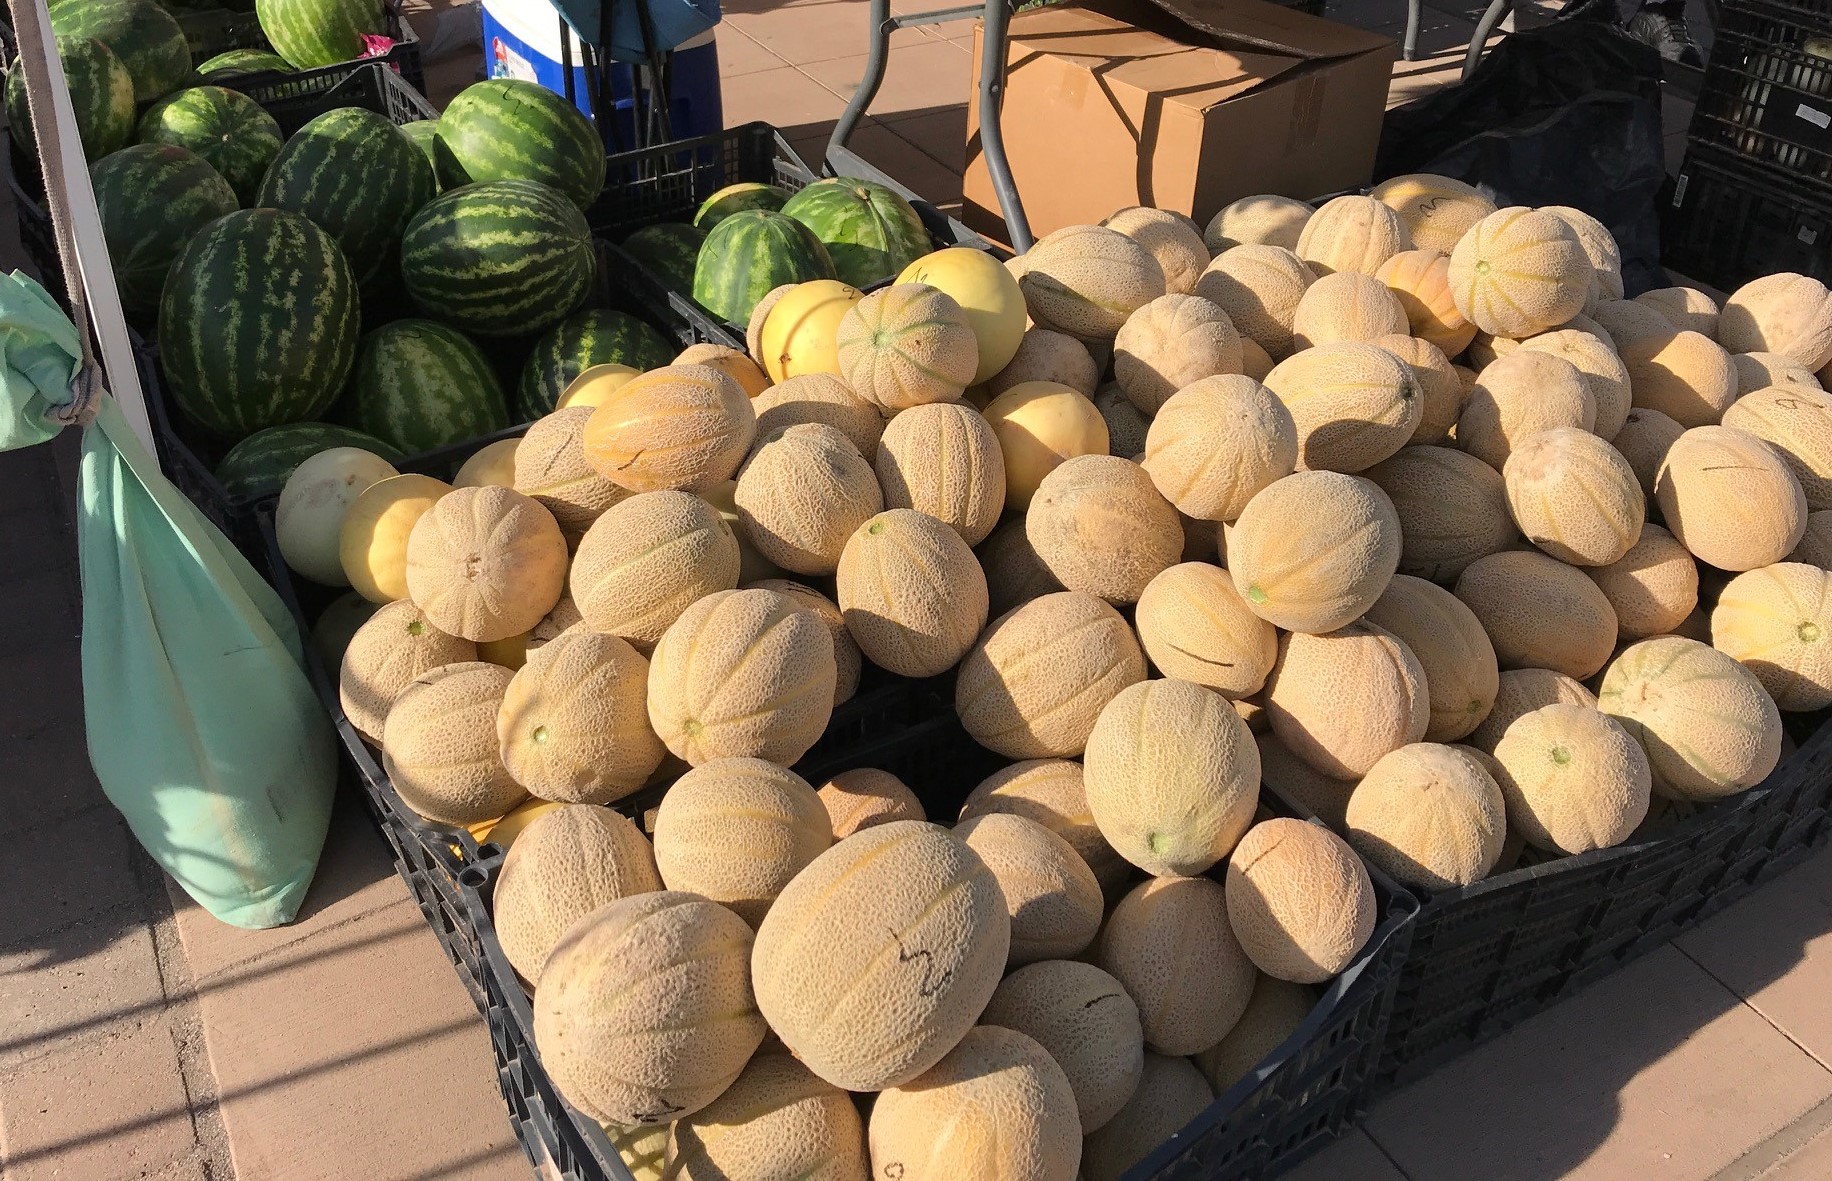 Black crates overflowing with cantaloupe melons in foreground, and black crates filled with watermelons in the background